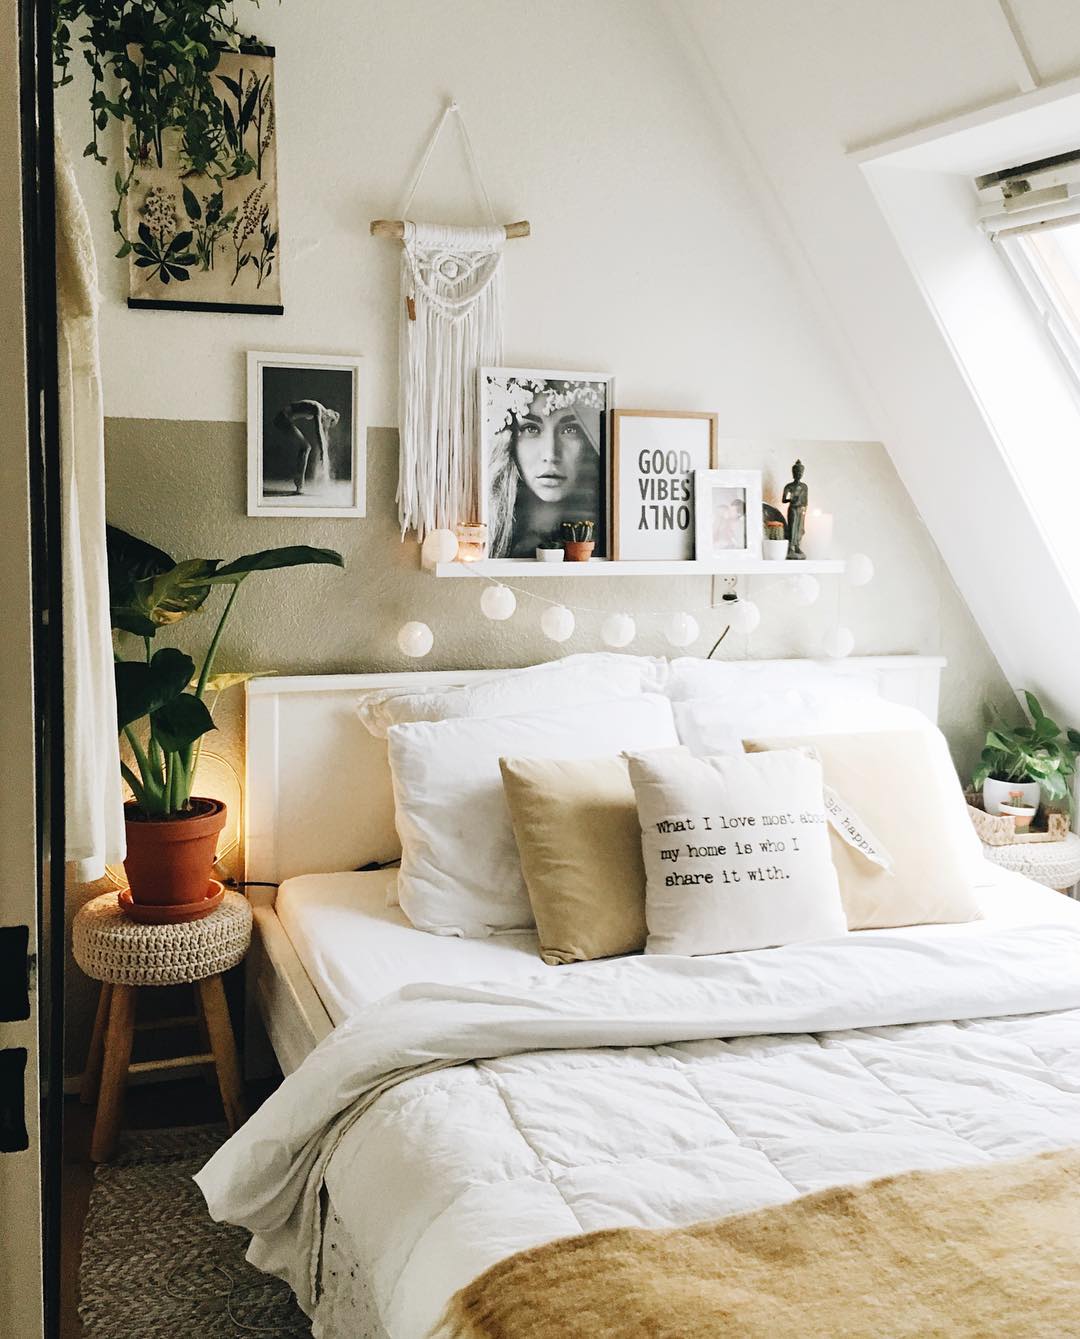 Bedroom with Small Plants on Nightstands. Photo by Instagram user @lovedbysheila